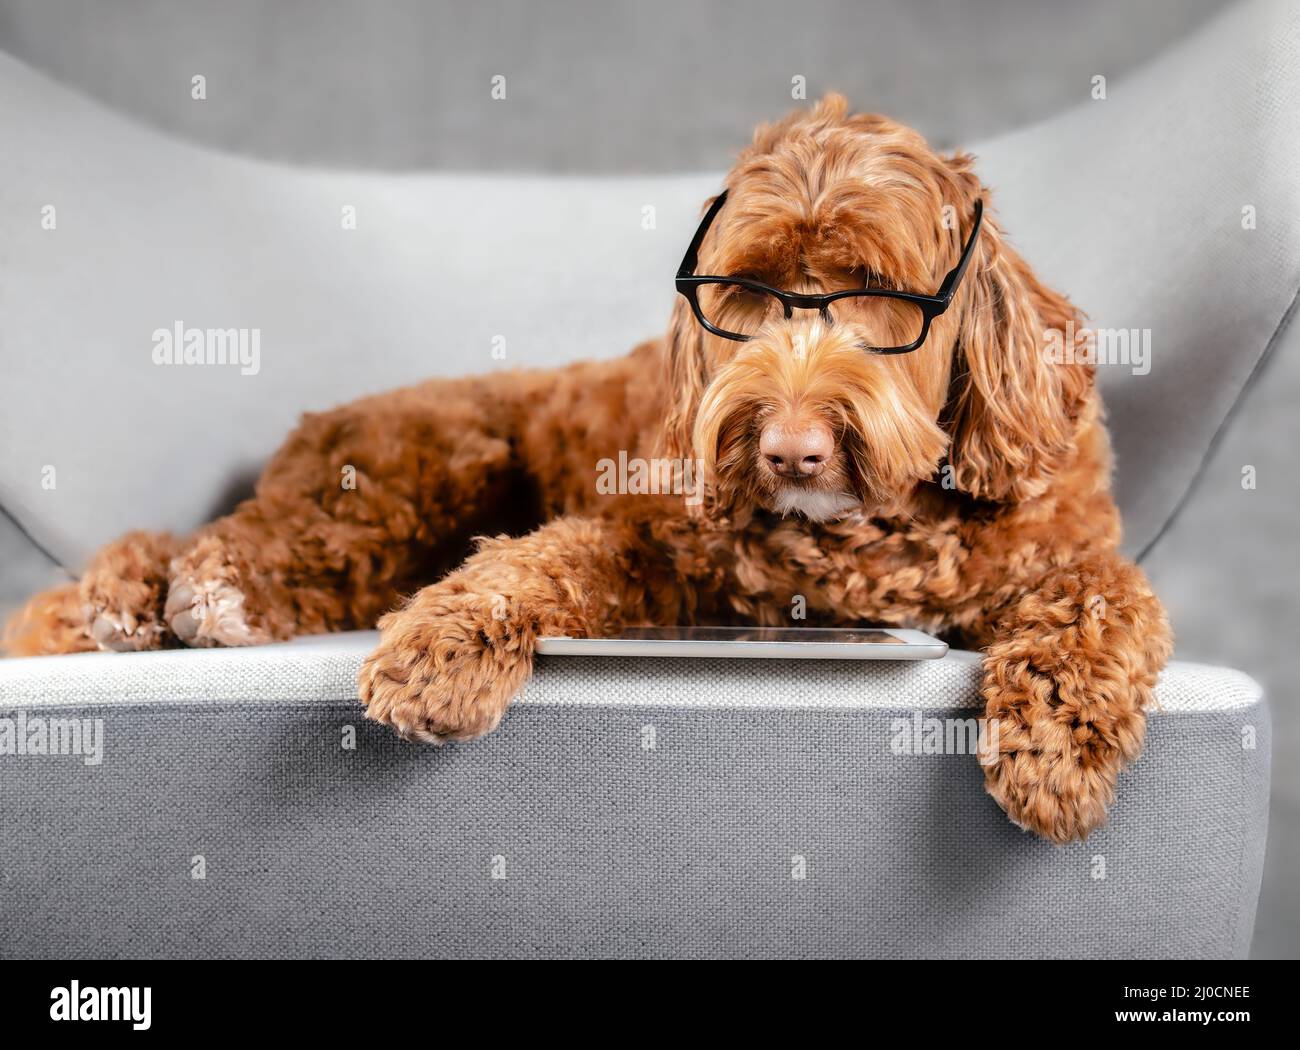 Smart dog using tablet while lounging on sofa chair. Cute female apricot Labradoodle dog wearing glasses. Concept for pets using technology, or dogs b Stock Photo